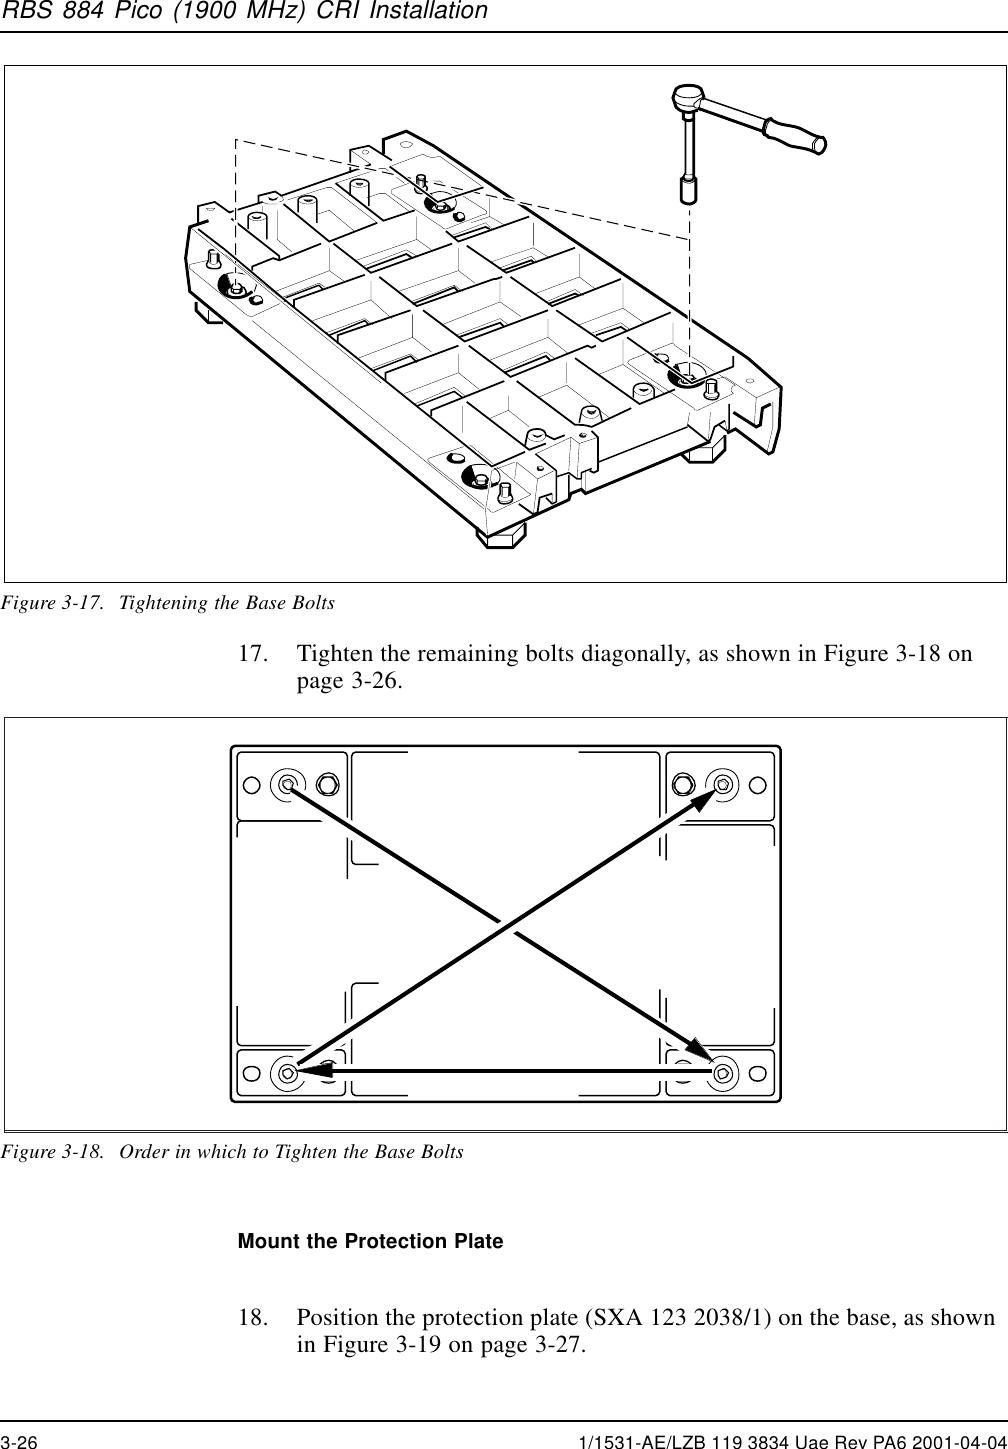 RBS 884 Pico (1900 MHz) CRI InstallationFigure 3-17. Tightening the Base Bolts17. Tighten the remaining bolts diagonally, as shown in Figure 3-18 onpage 3-26.Figure 3-18. Order in which to Tighten the Base BoltsMount the Protection Plate18. Position the protection plate (SXA 123 2038/1) on the base, as shownin Figure 3-19 on page 3-27.3-26 1/1531-AE/LZB 119 3834 Uae Rev PA6 2001-04-04